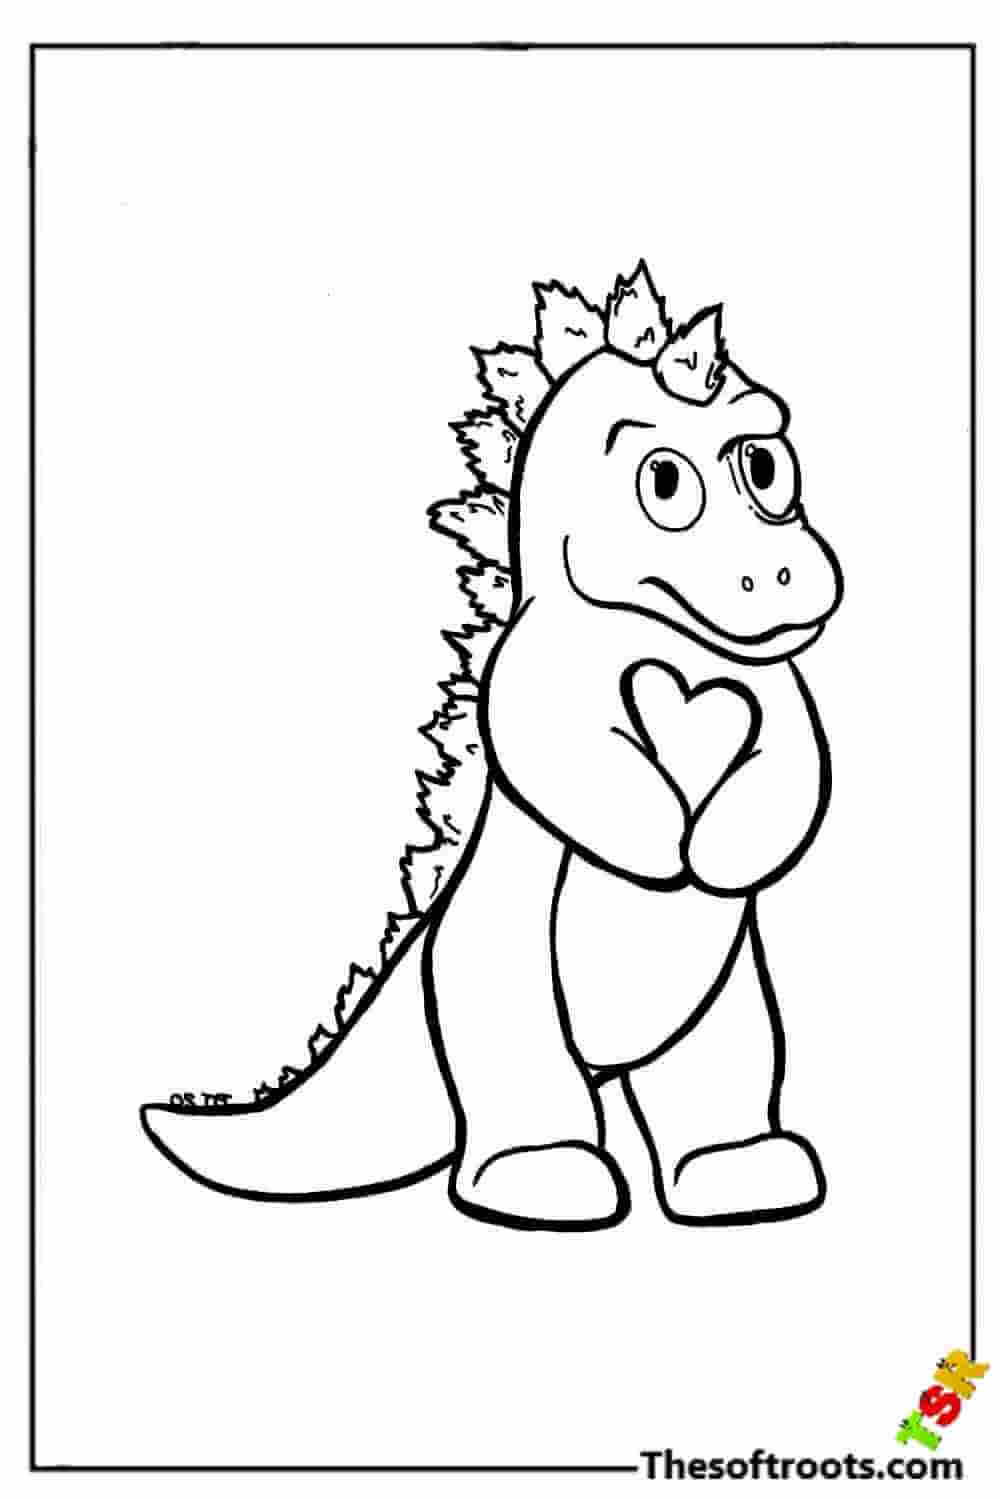 Little Godzilla coloring pages